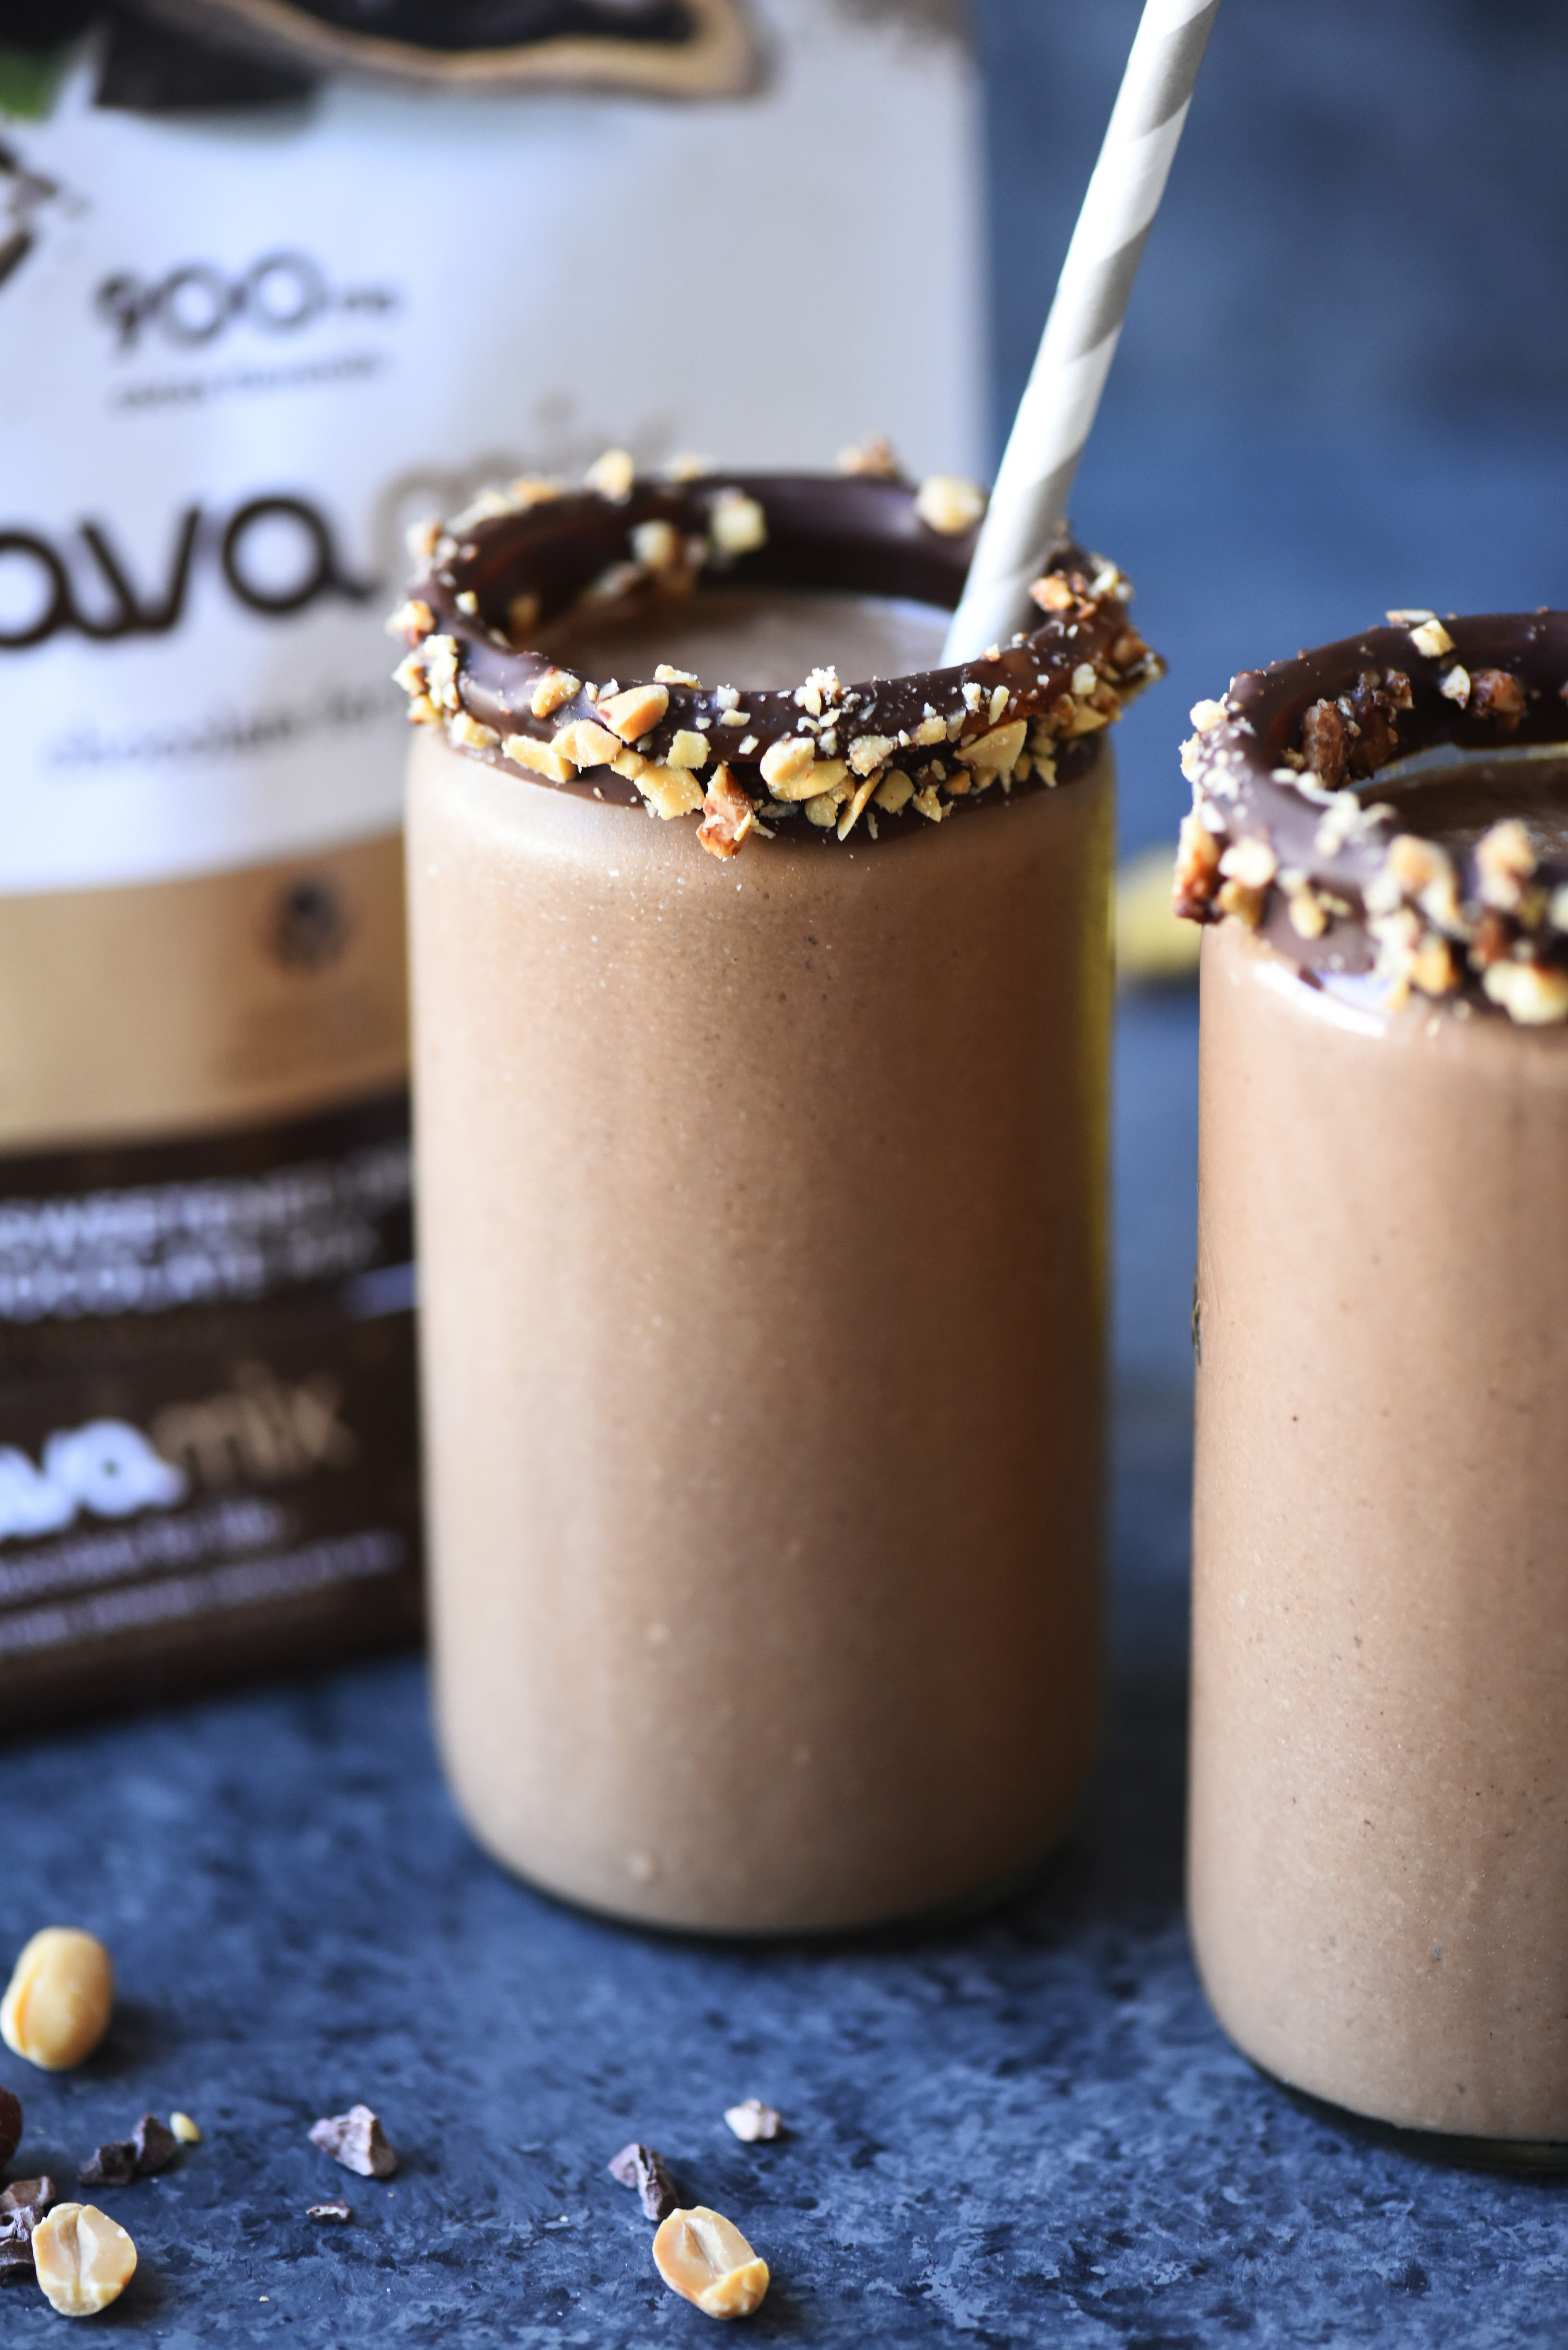 Healthy Chocolate Peanut Butter Banana Smoothie Recipe with FlavaMix Unsweetened Drinking Chocolate